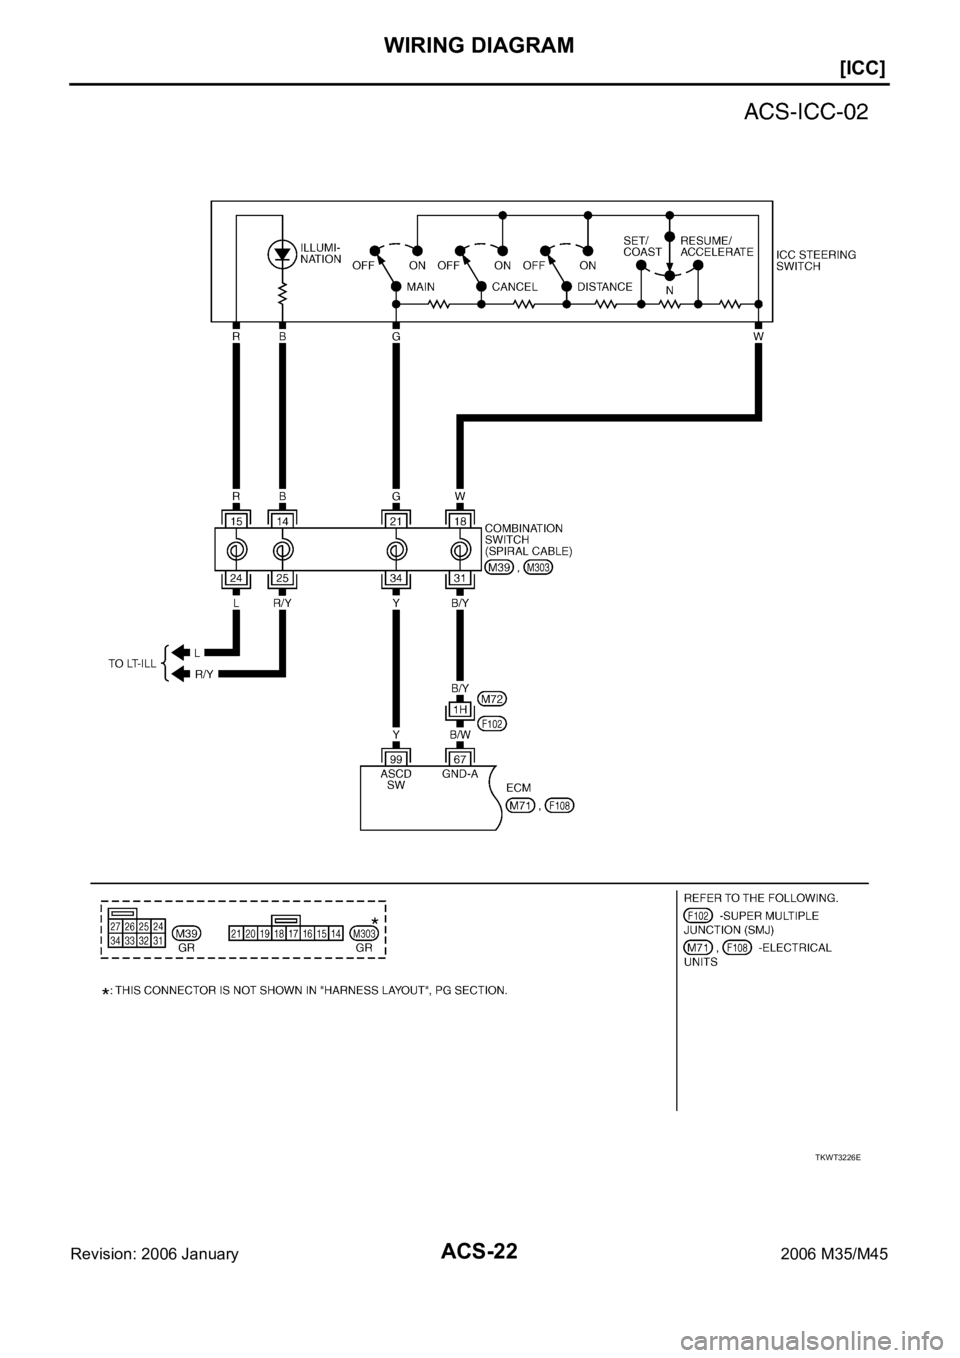 INFINITI M35 2006  Factory Owners Guide ACS-22
[ICC]
WIRING DIAGRAM
Revision: 2006 January2006 M35/M45
TKWT3226E 